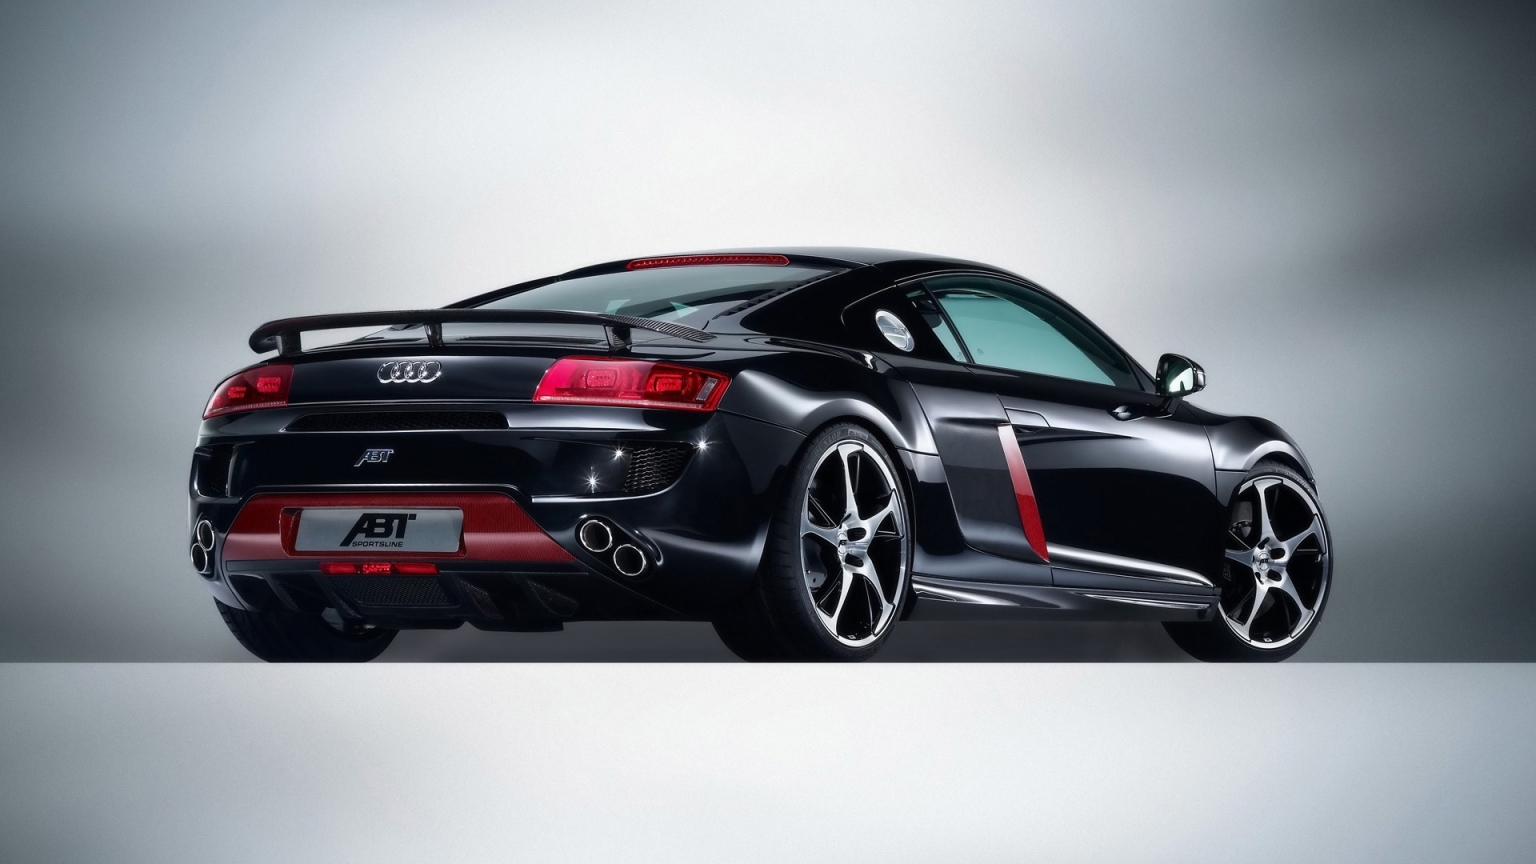 2008 Abt Audi R8 - Rear Angle for 1536 x 864 HDTV resolution